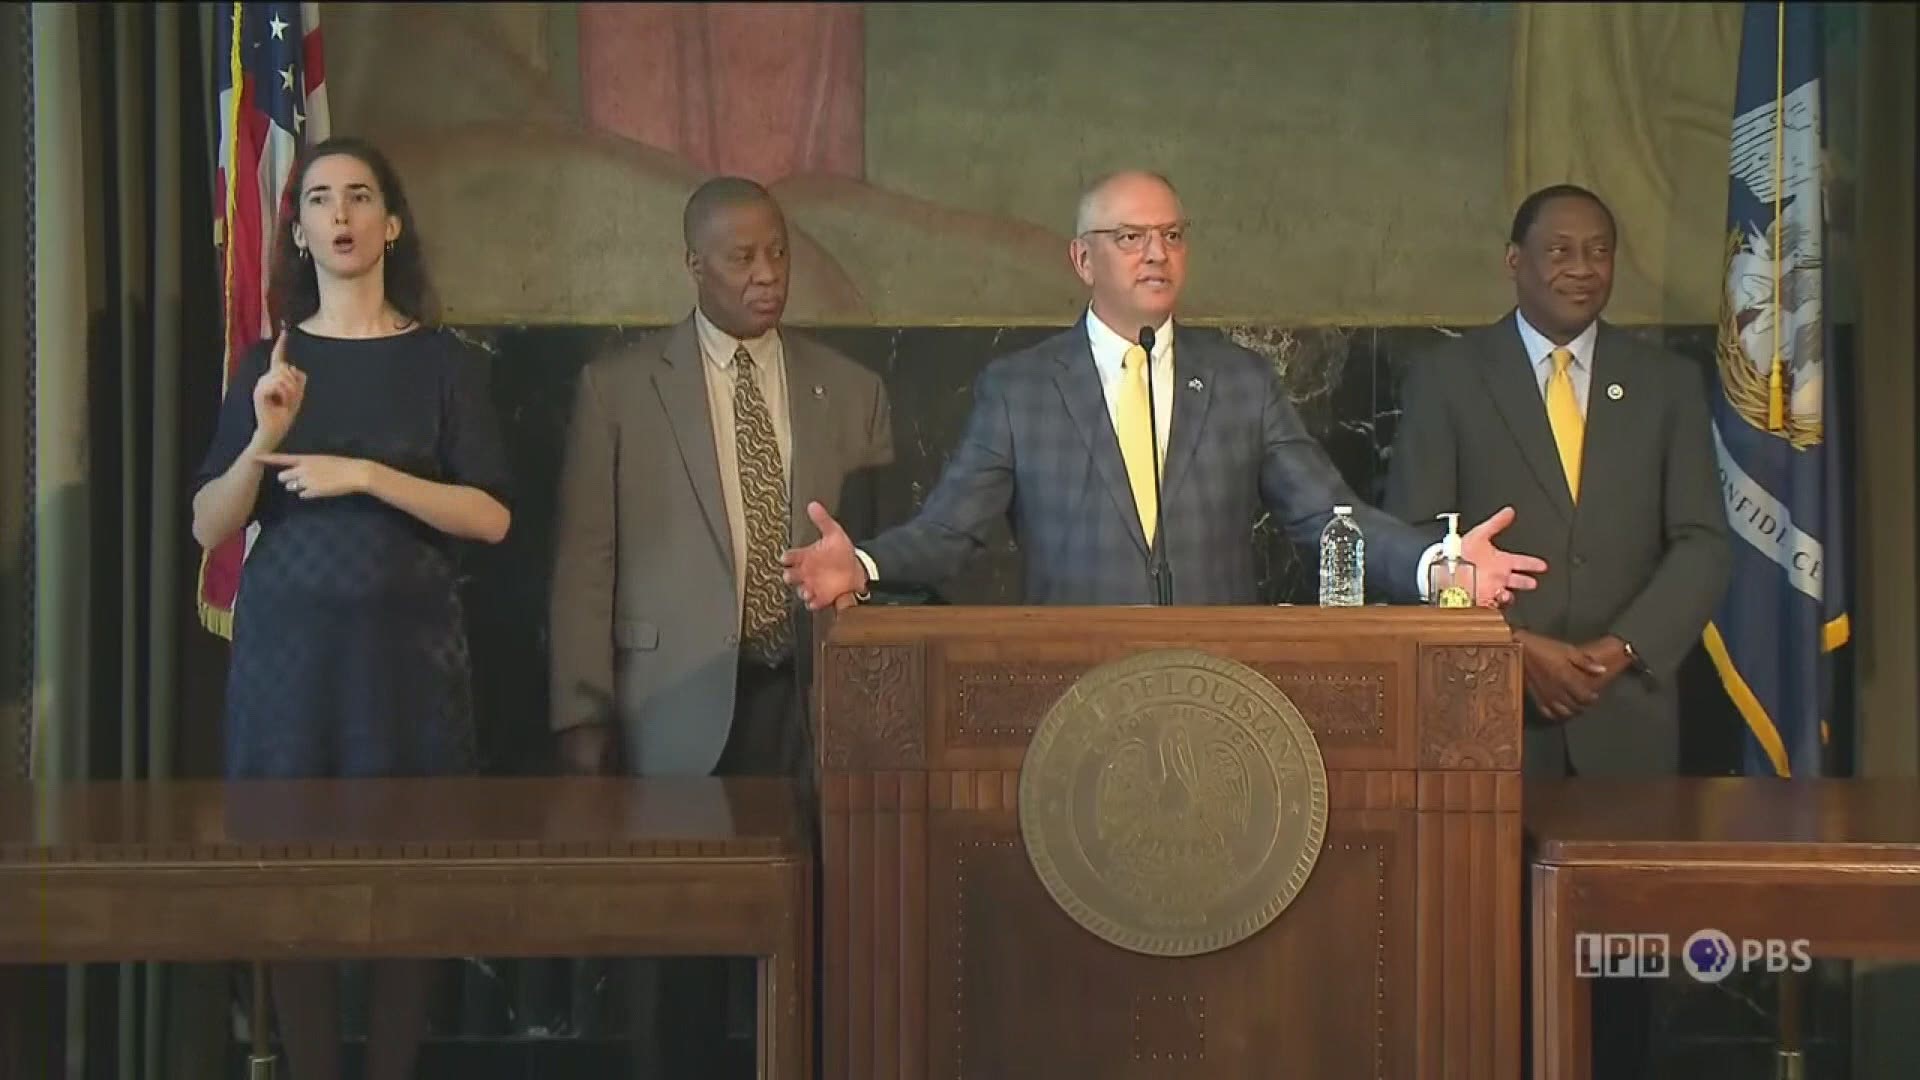 John Bel Edwards expressed his feelings towards the veto session and the bills included. The governor vetoed 28 bills.